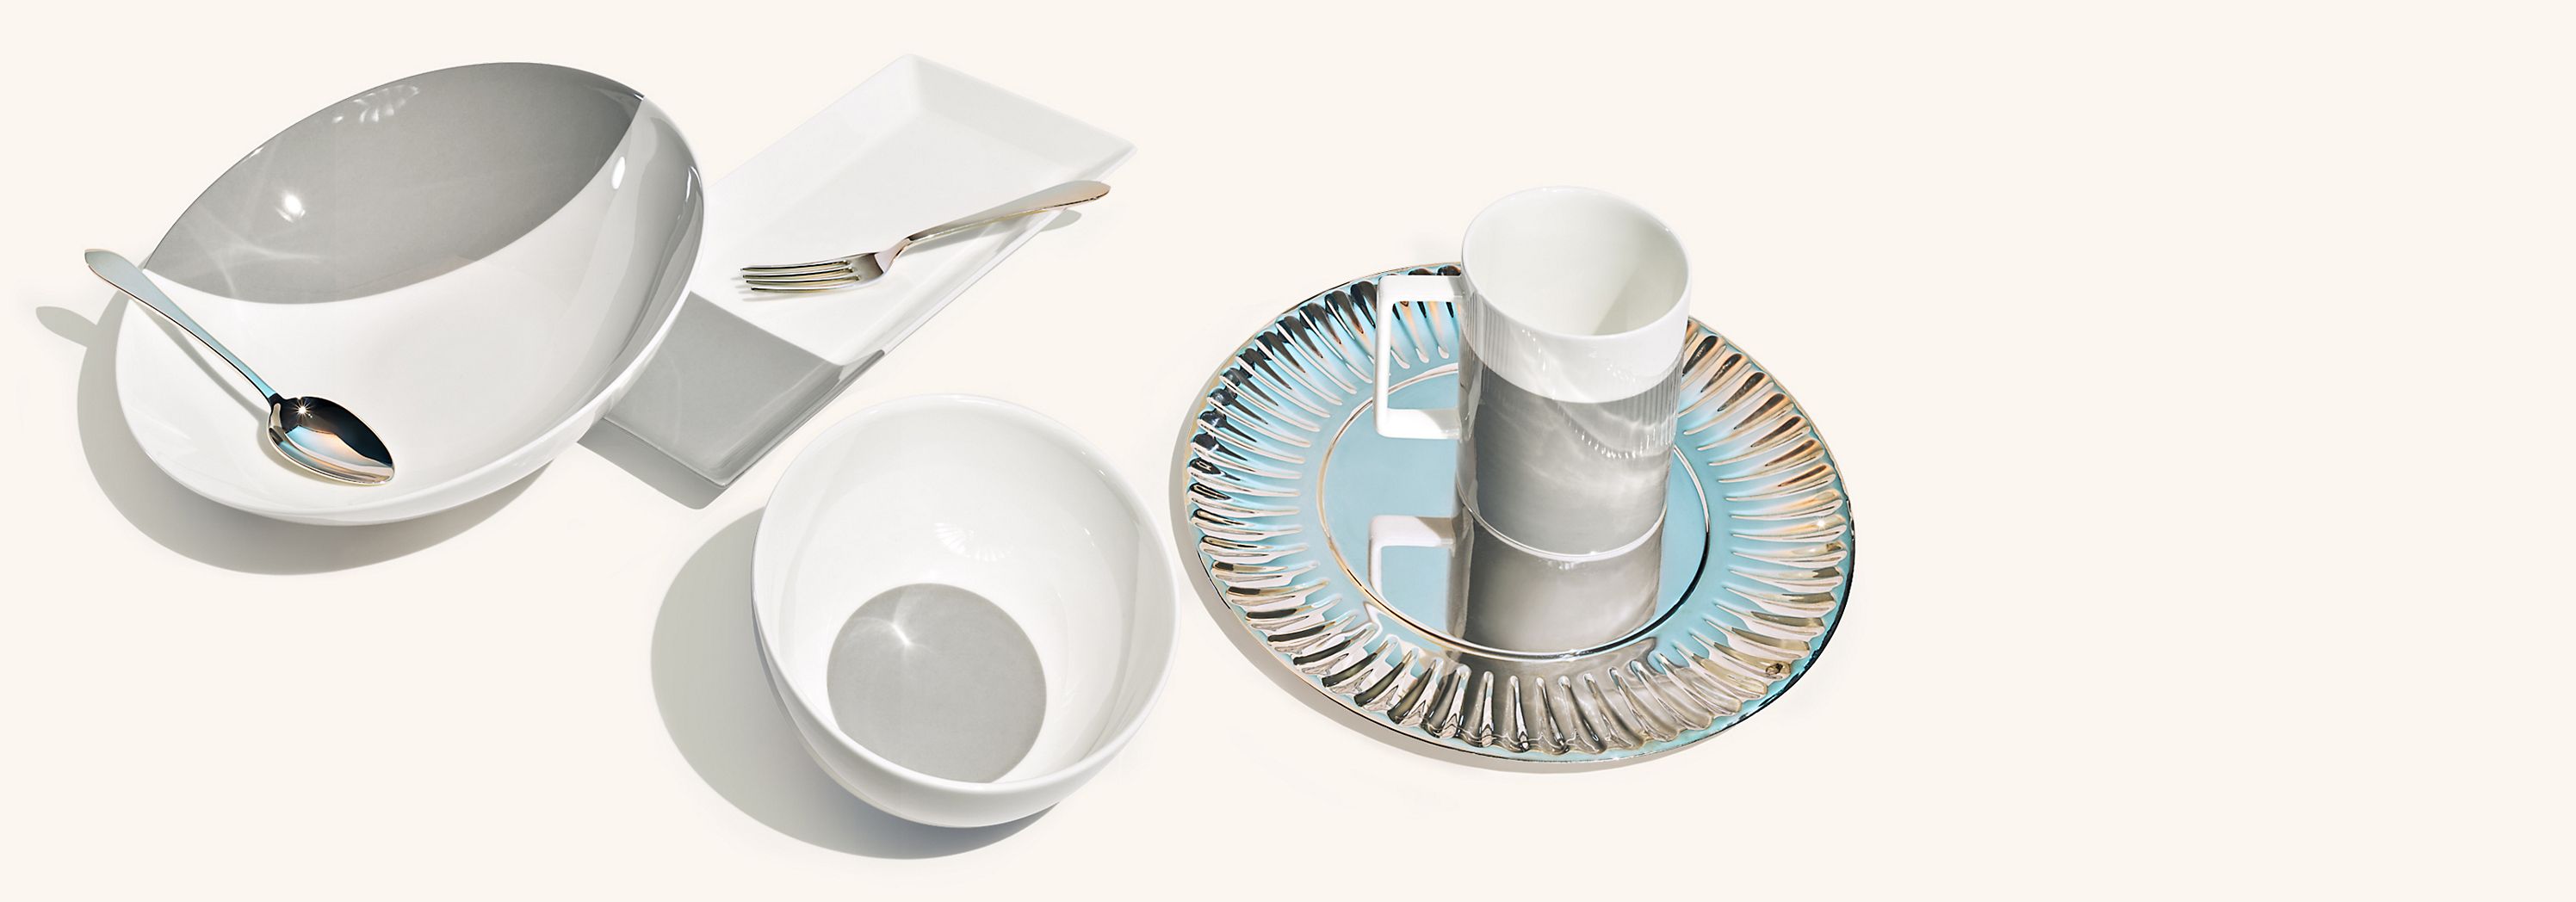 Browse New Tiffany & Co. Home & Accessories Designs